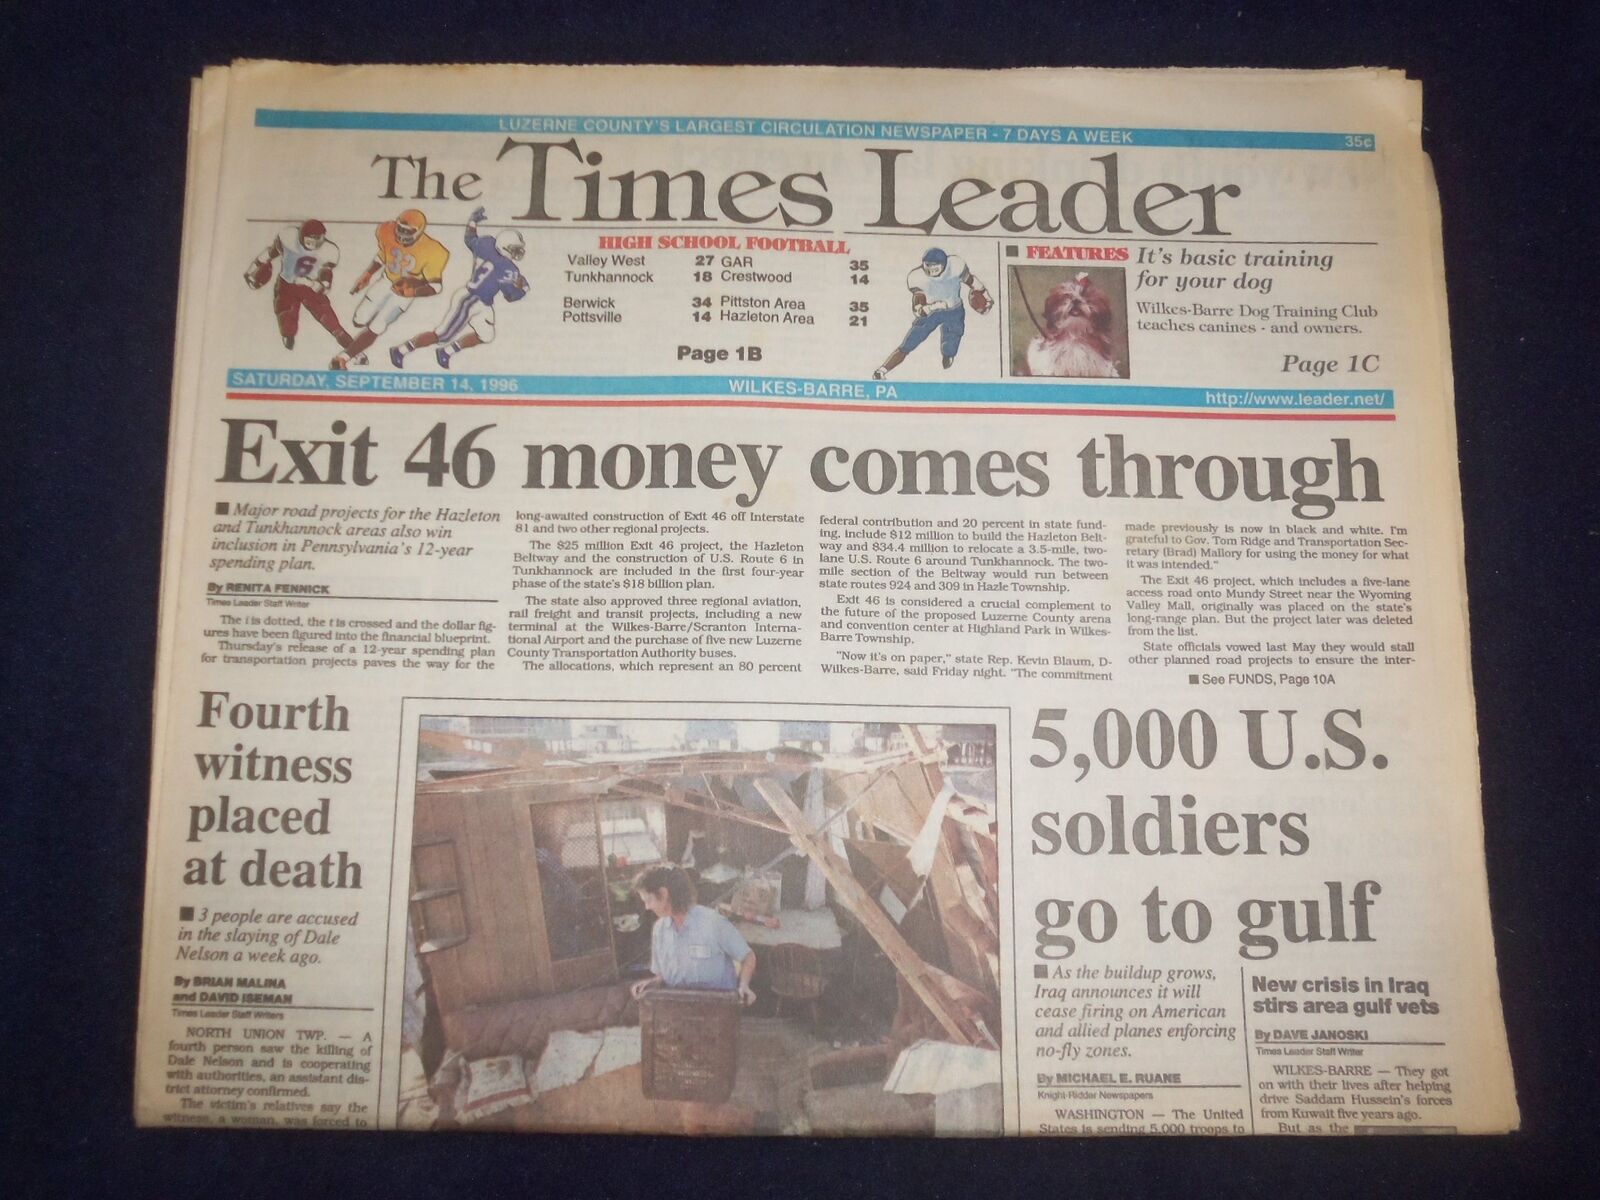 1996 SEP 14 WILKES-BARRE TIMES LEADER - 5,000 U.S. SOLDIERS GO TO GULF - NP 8163